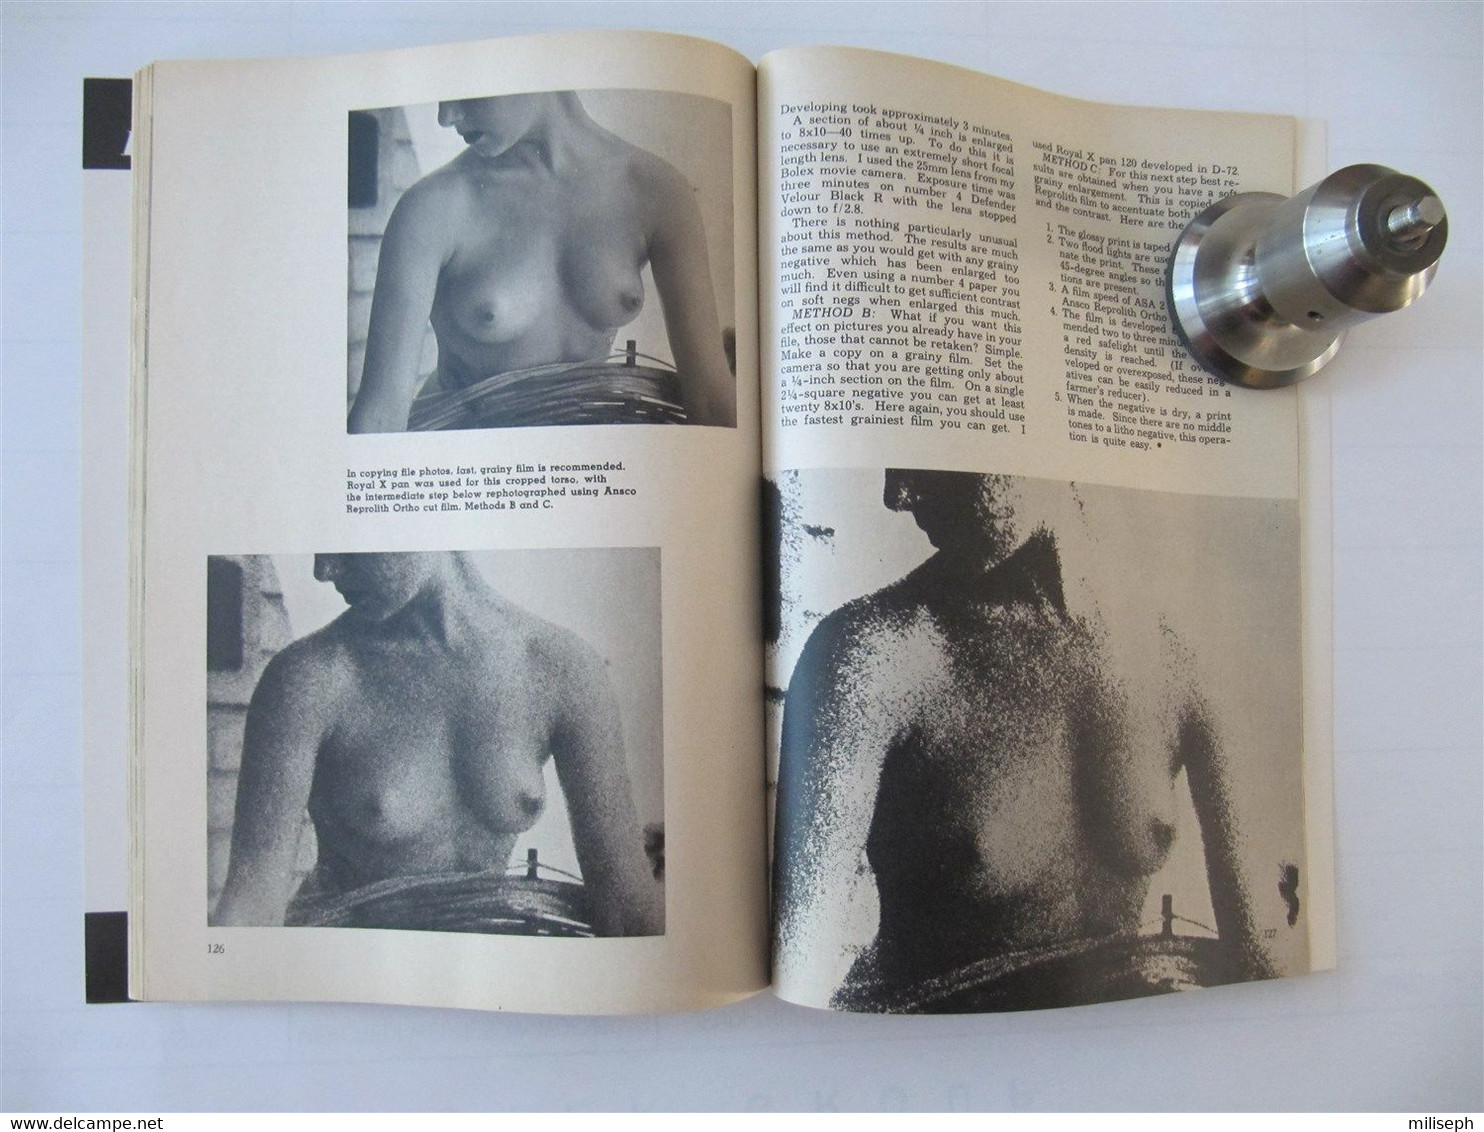 A FAWCETT HOW-TO BOOK - N° 400 - Peter Gowland's - FACE and FIGURE photography      (3920)